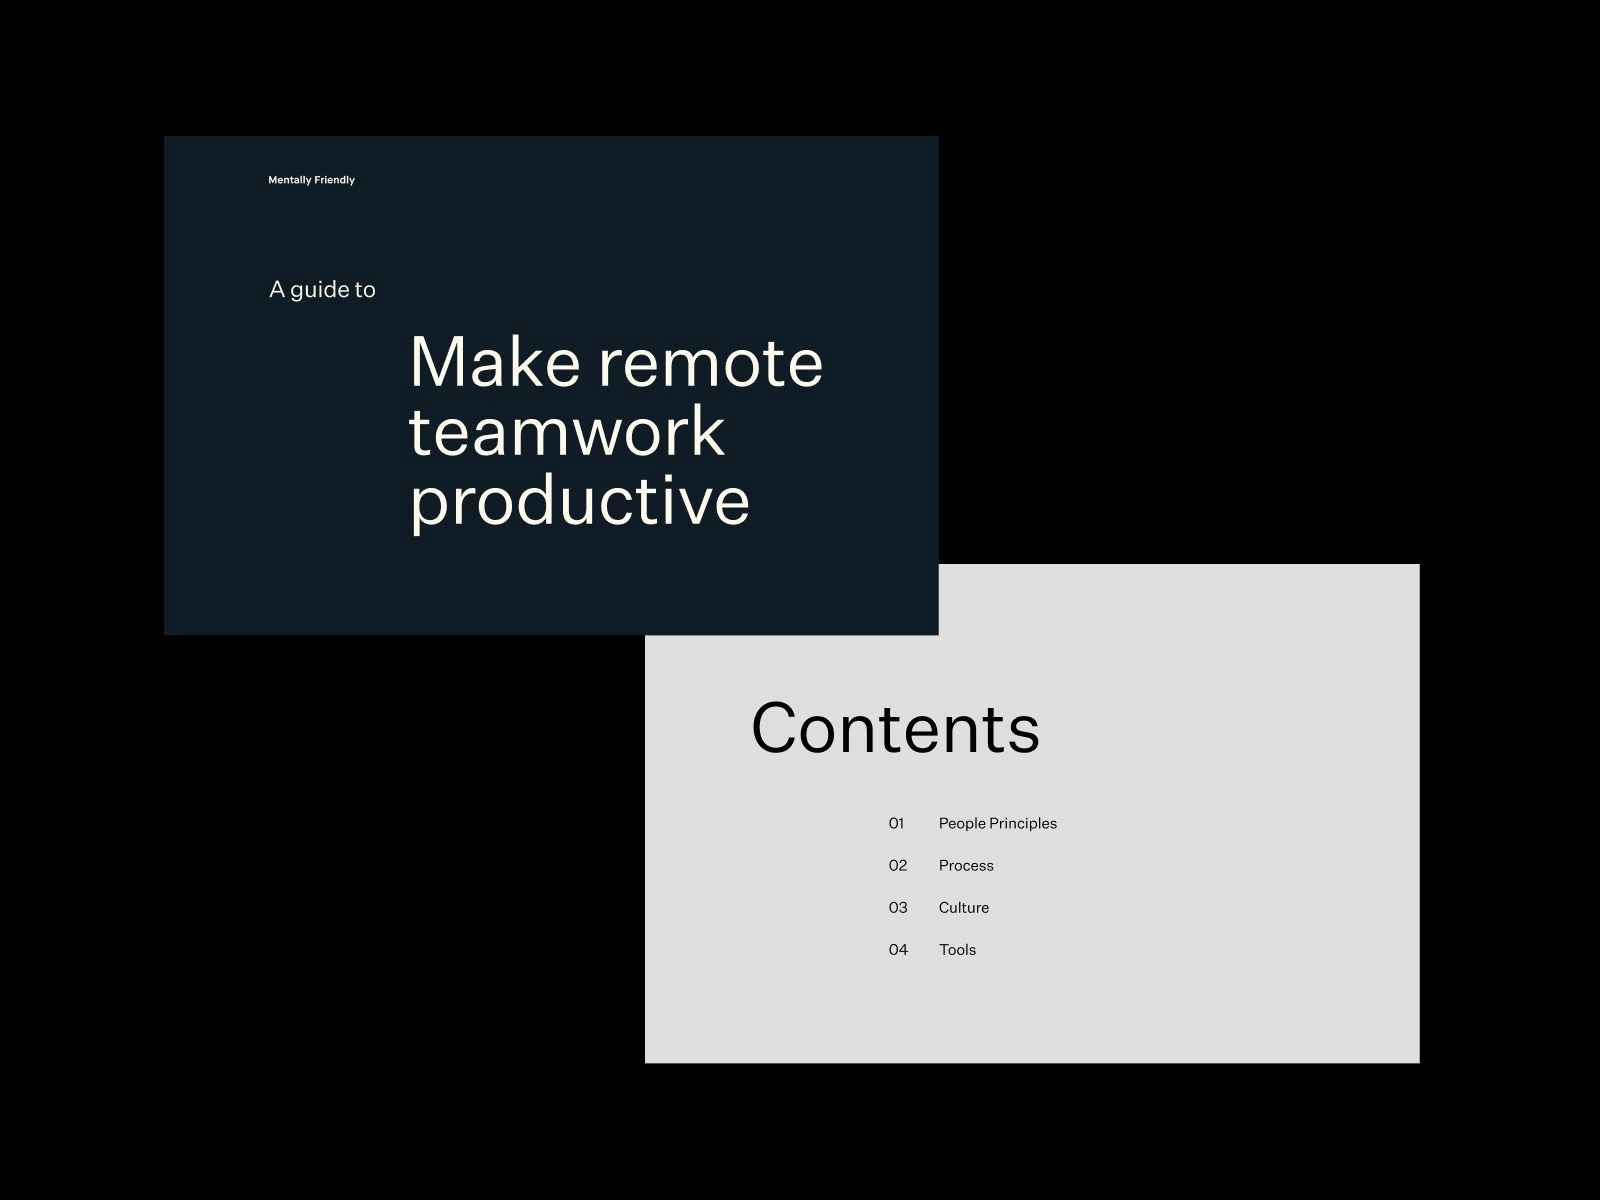 A guide to make remote teamwork productive